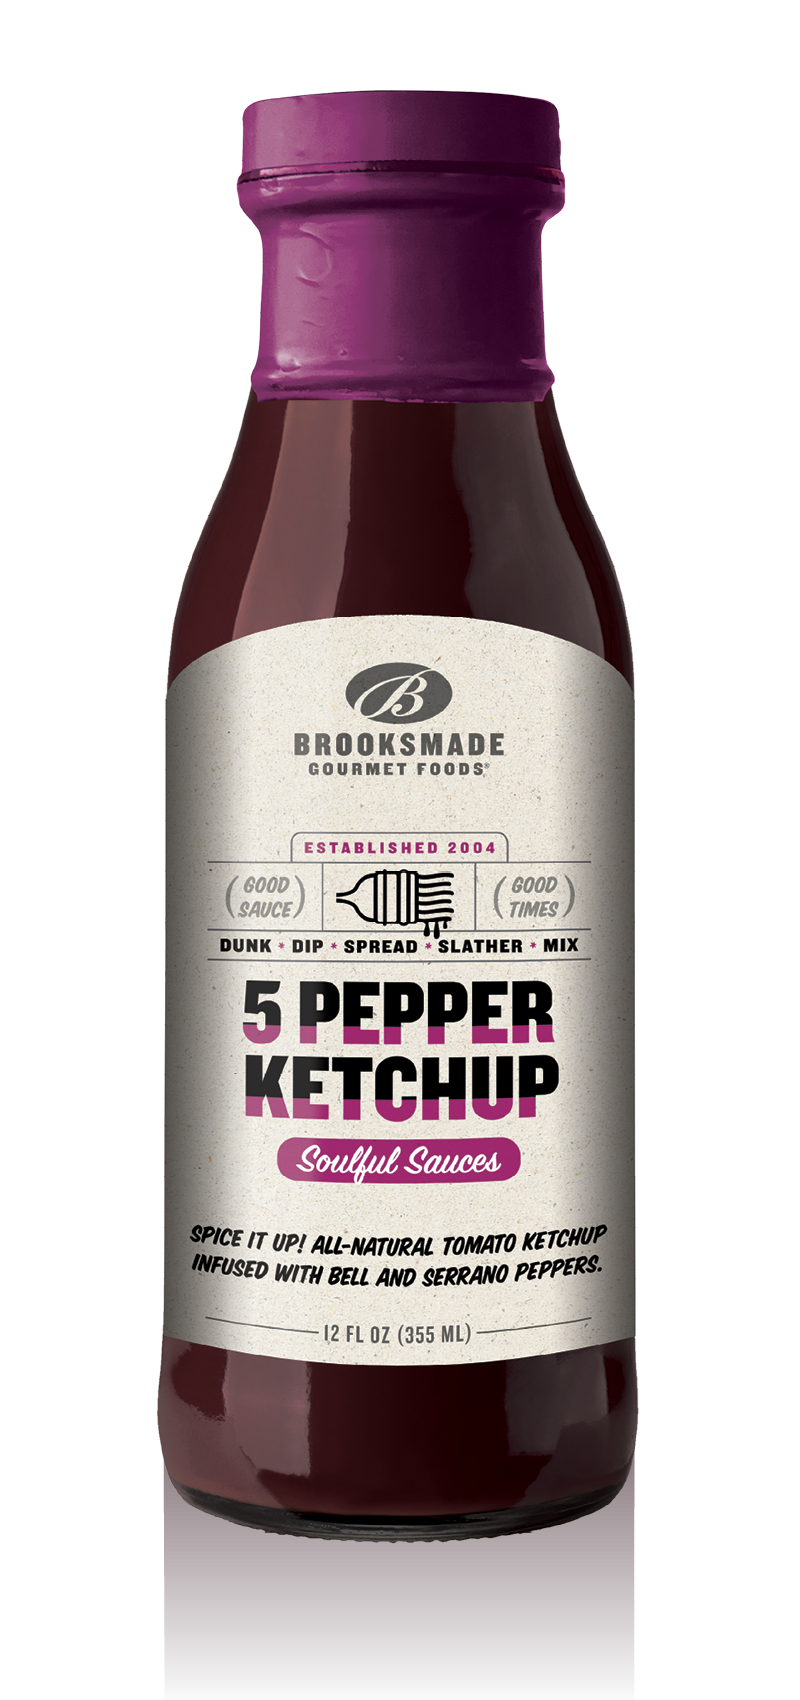 5 Pepper Ketchup, Gluten Free, No High Fructose Corn Syrup All-Natural Spicy Ketchup, Made with Organic Tomatoes 12 oz Case